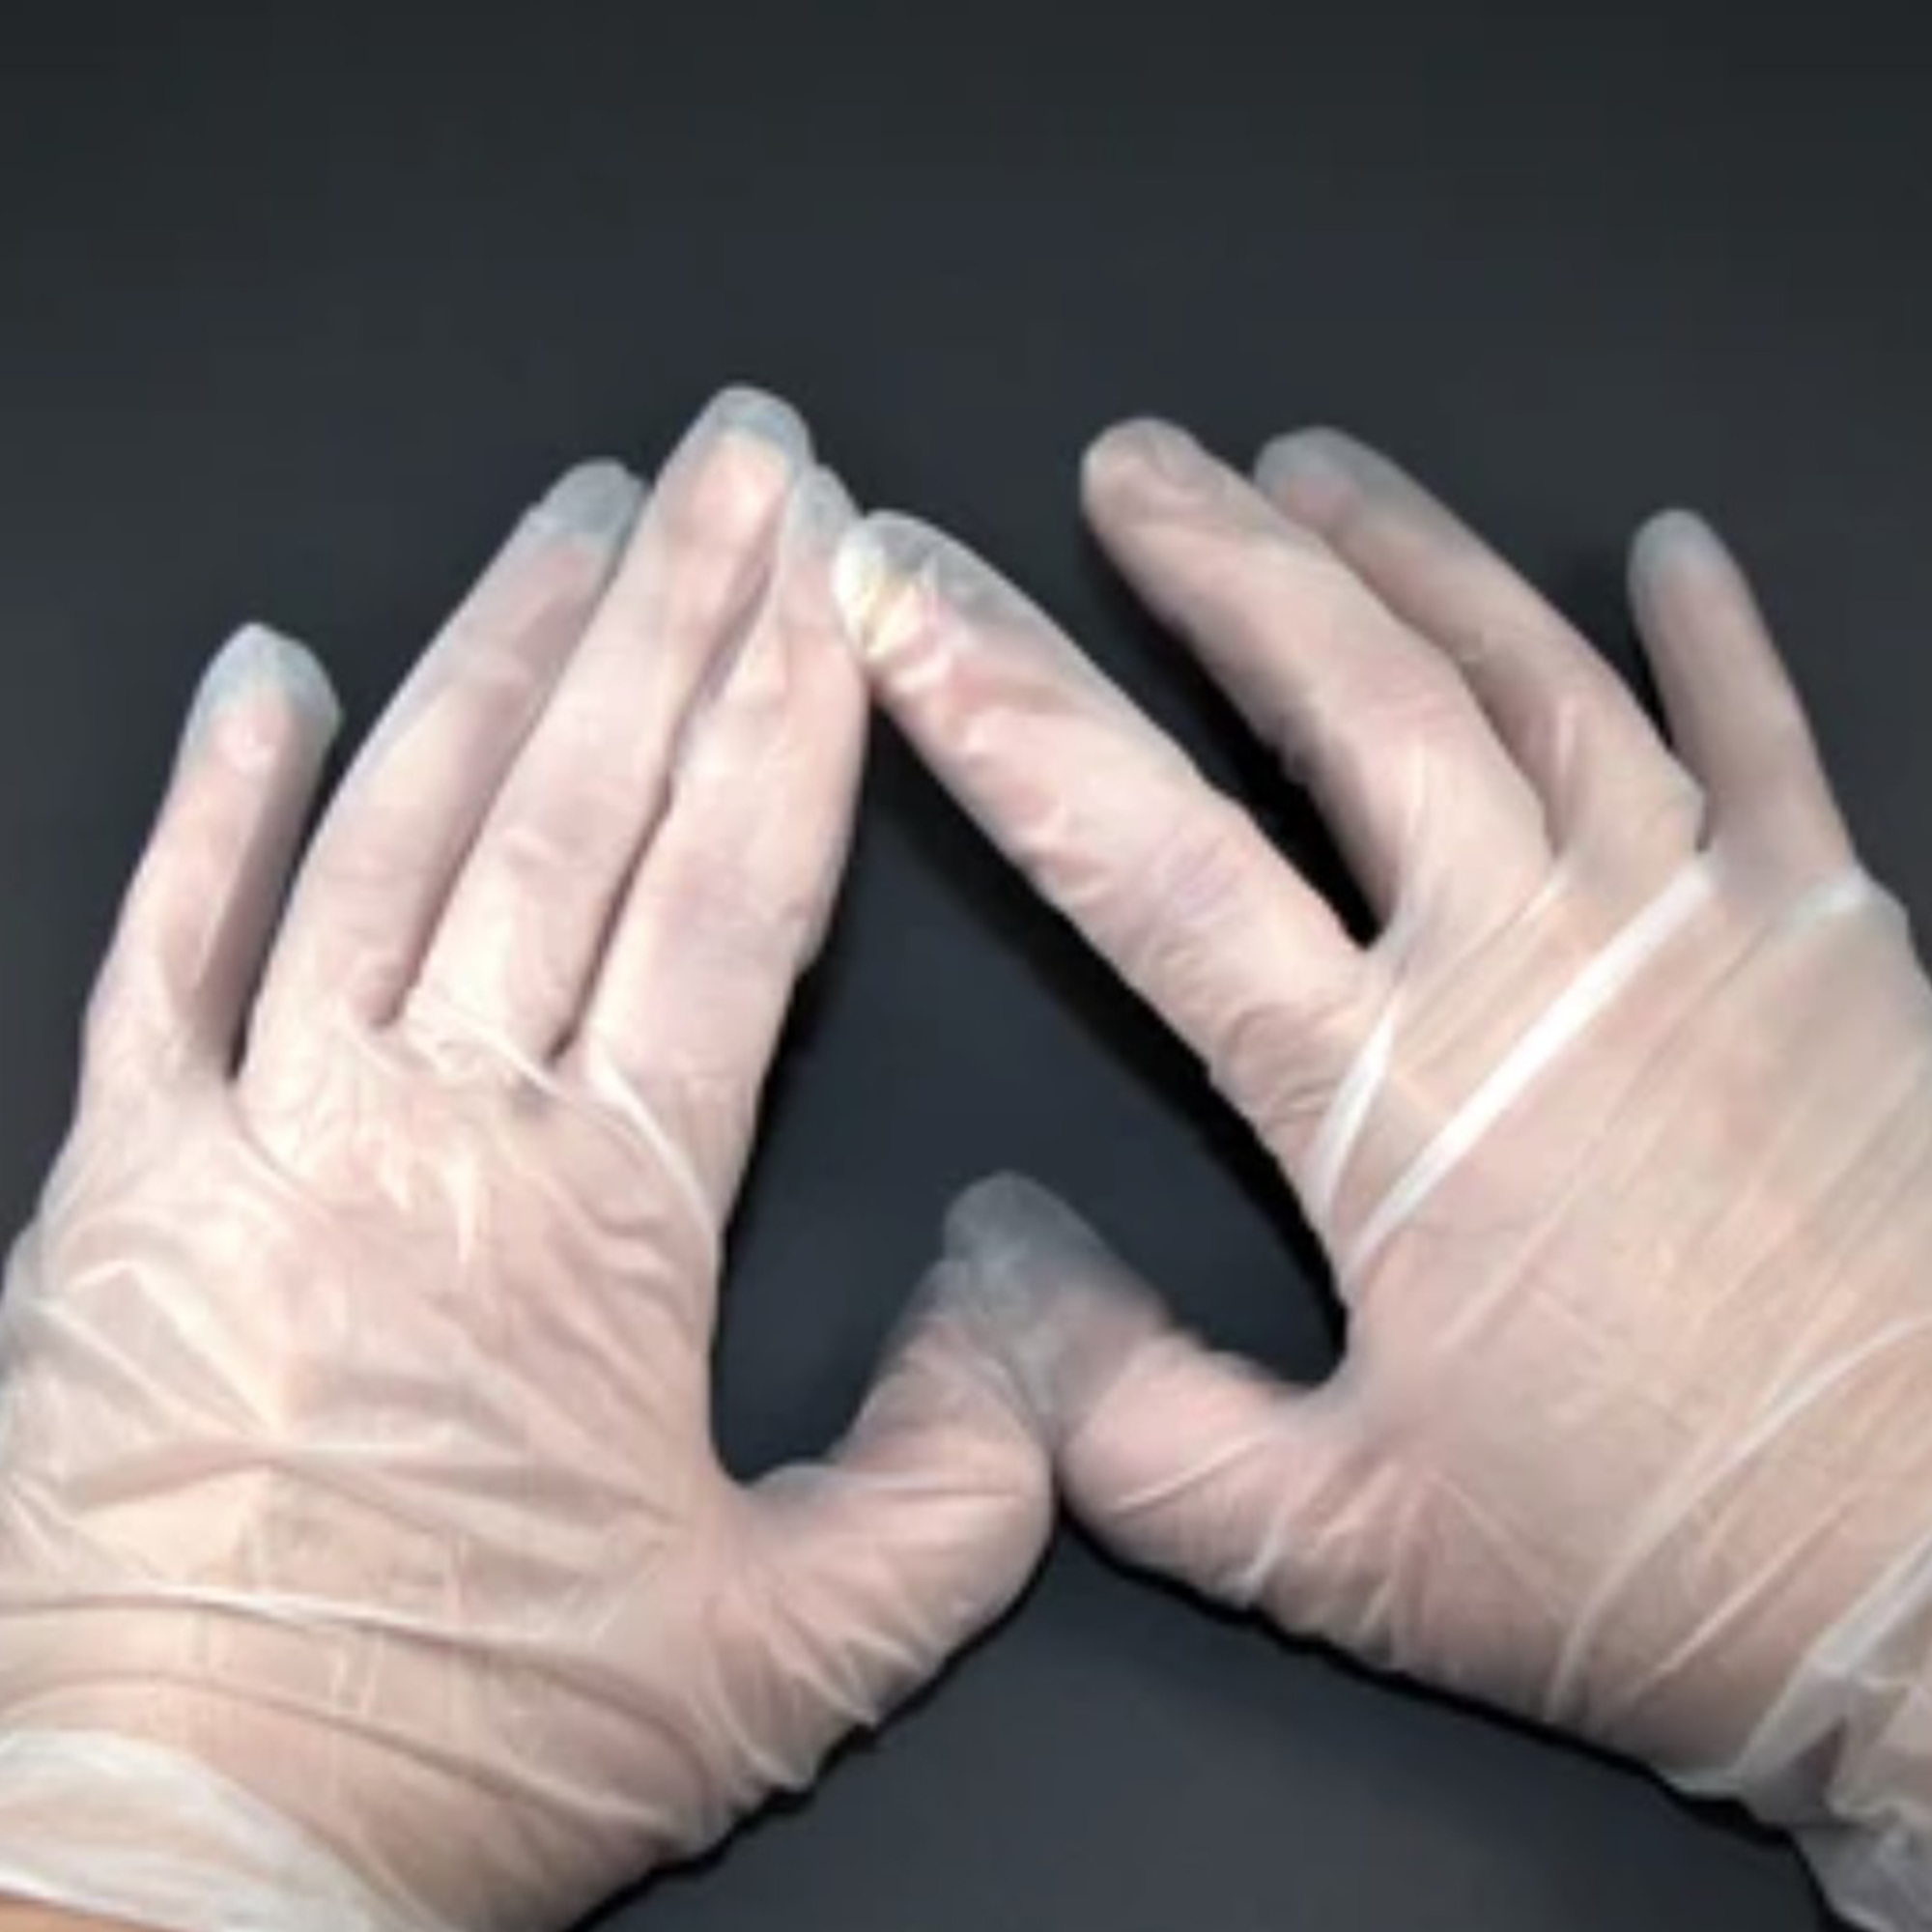 Cosmetic SPA/GLOVES FOR COSMETIC PROCEDURES/Vinyl Gloves for Cosmetic Procedures